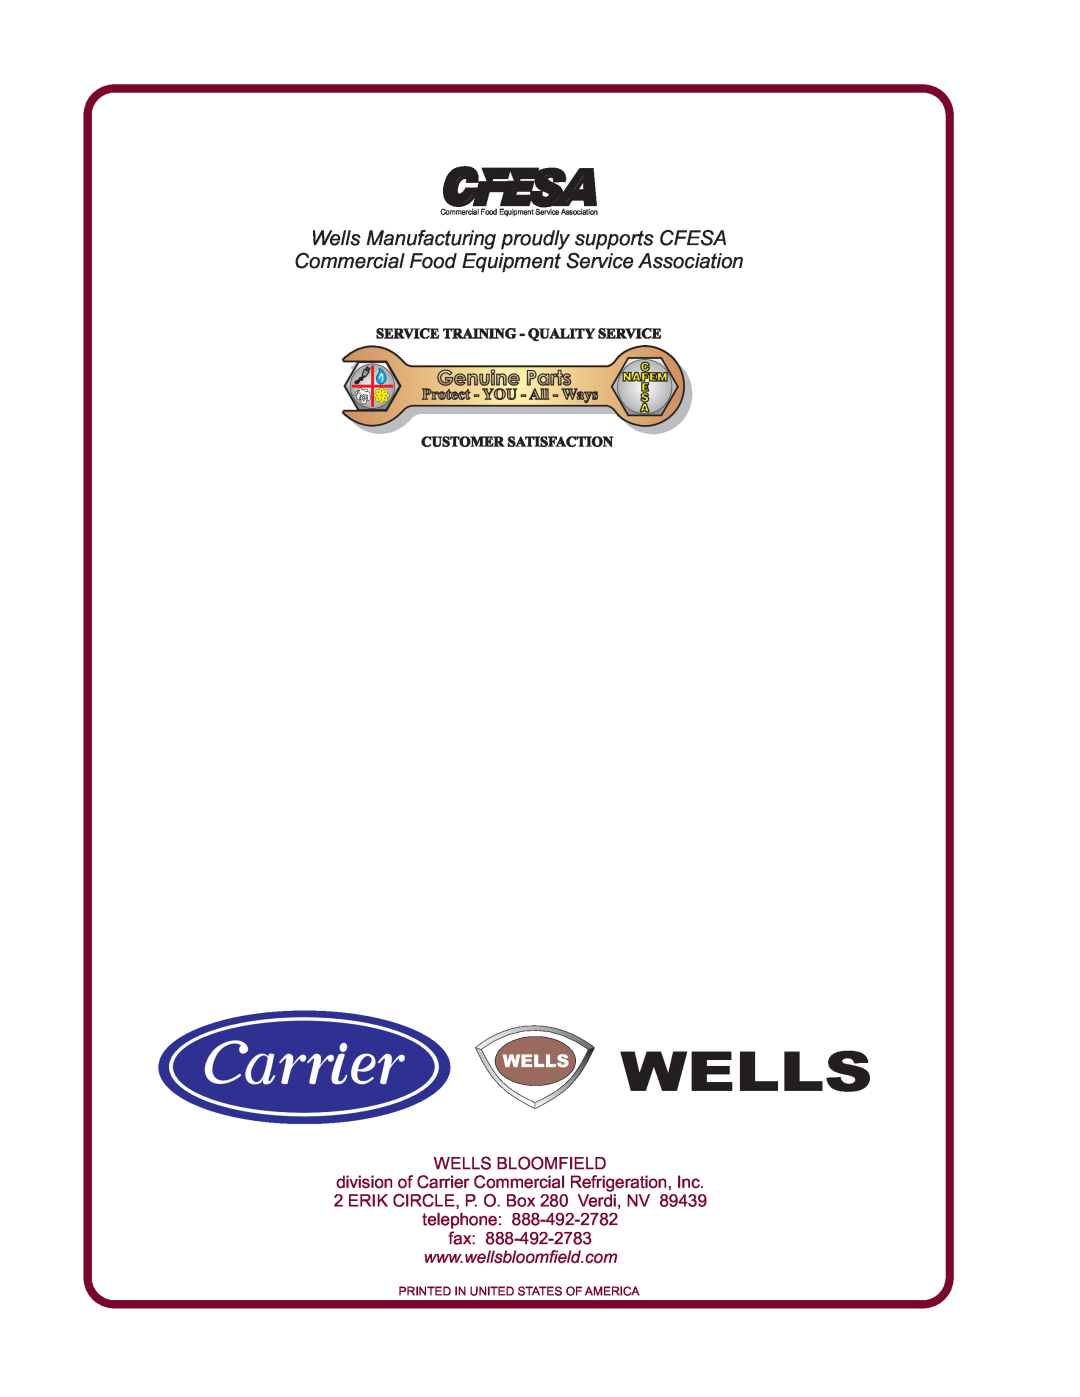 Wells HDW-2 Wells Manufacturing proudly supports CFESA, Commercial Food Equipment Service Association, Genuine Parts 